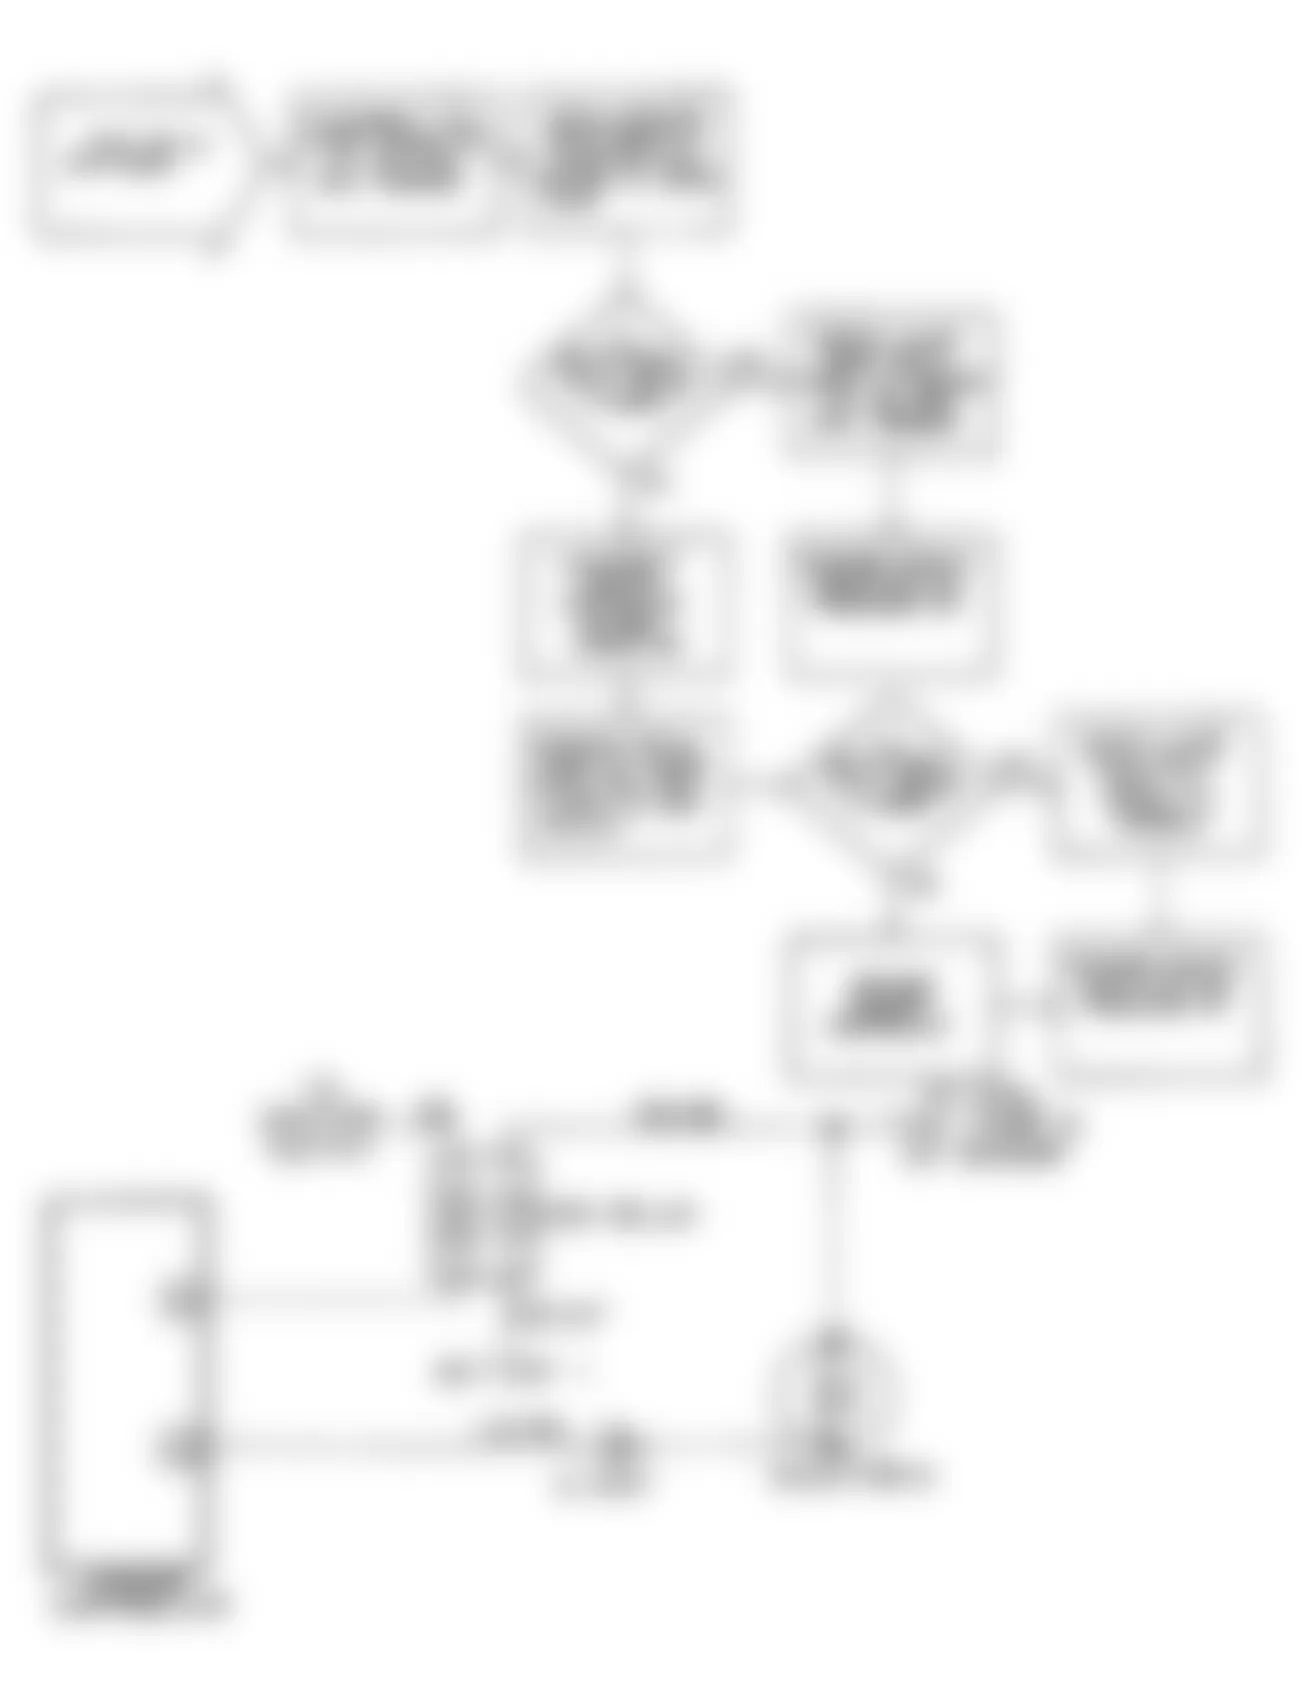 Dodge Daytona Shelby 1990 - Component Locations -  DR-19: Flow Chart (2 of 2)